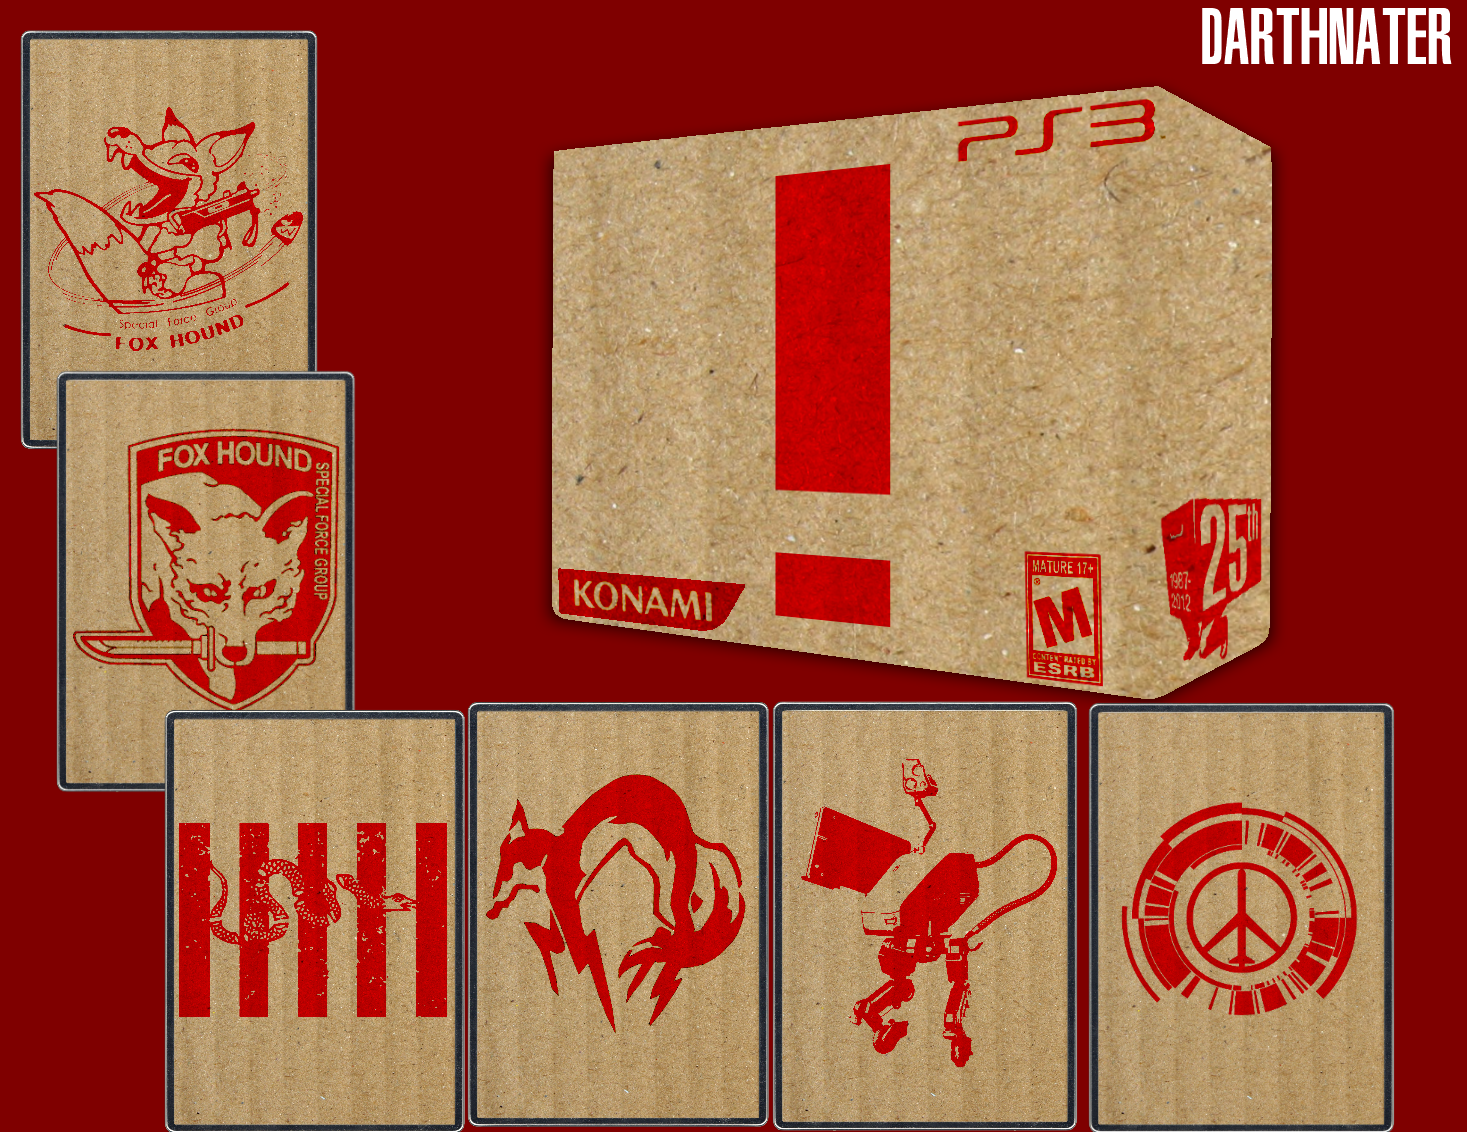 Metal Gear Solid 25th Anniversary Collection box cover